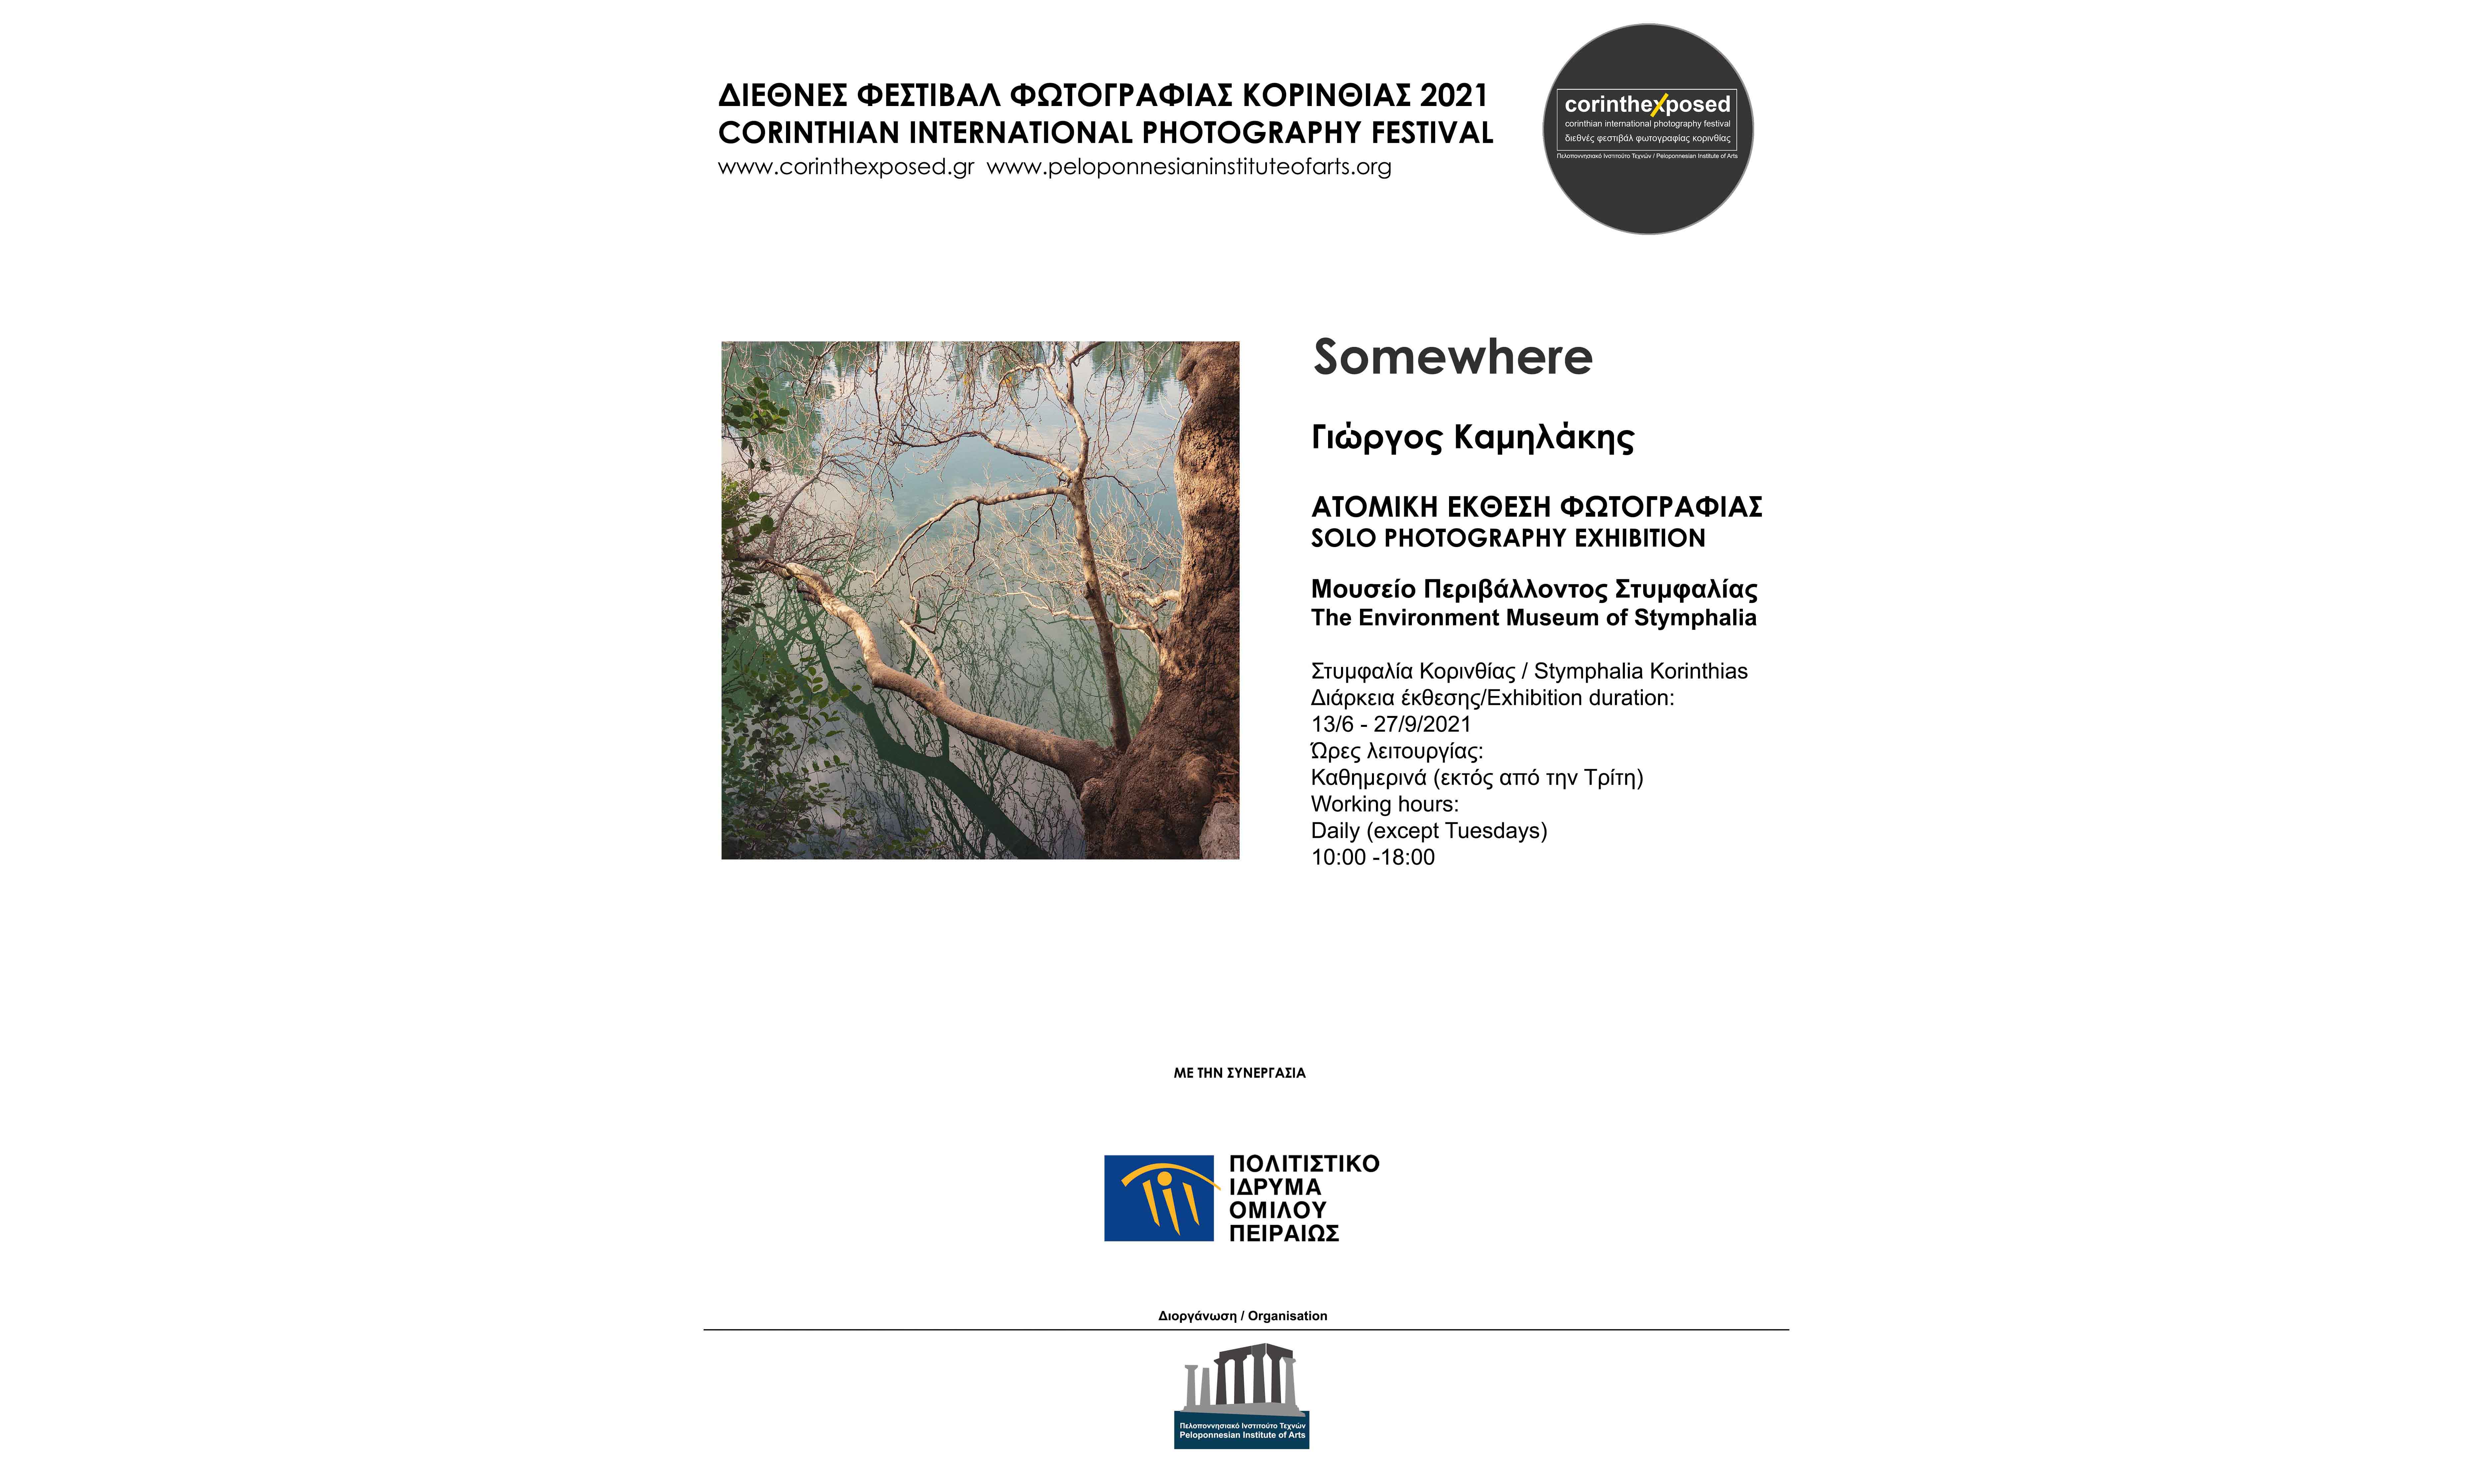 Solo exhibition by George Kamilakis entitled "Somewhere" at the Environment Museum of Stymphalia